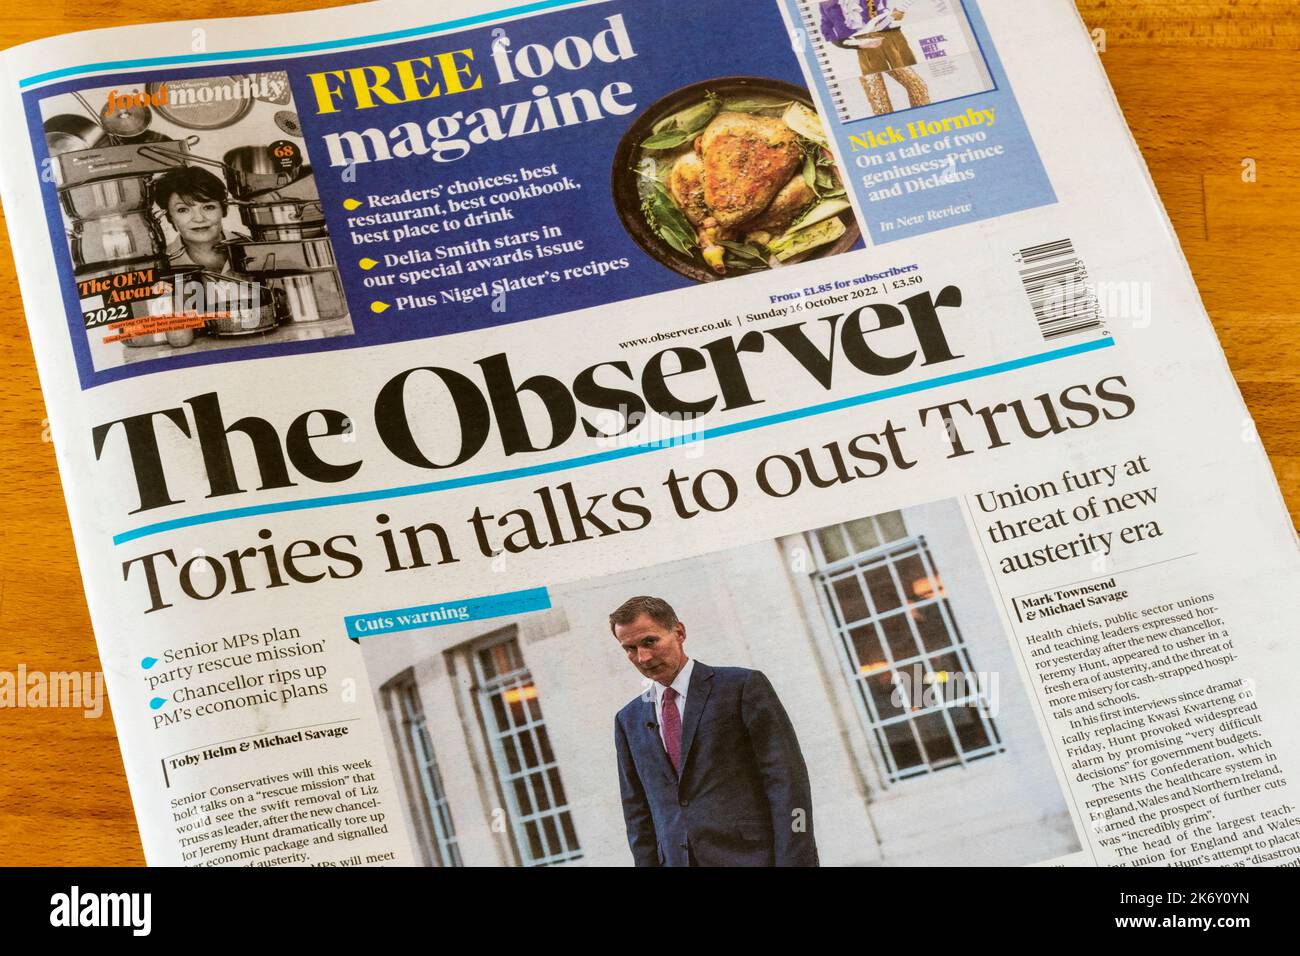 16 October 2022. Headline in The Observer reads Tories in talks to oust Truss. After financial crisis & replacement of Chancellor of the Exchequer. Stock Photo